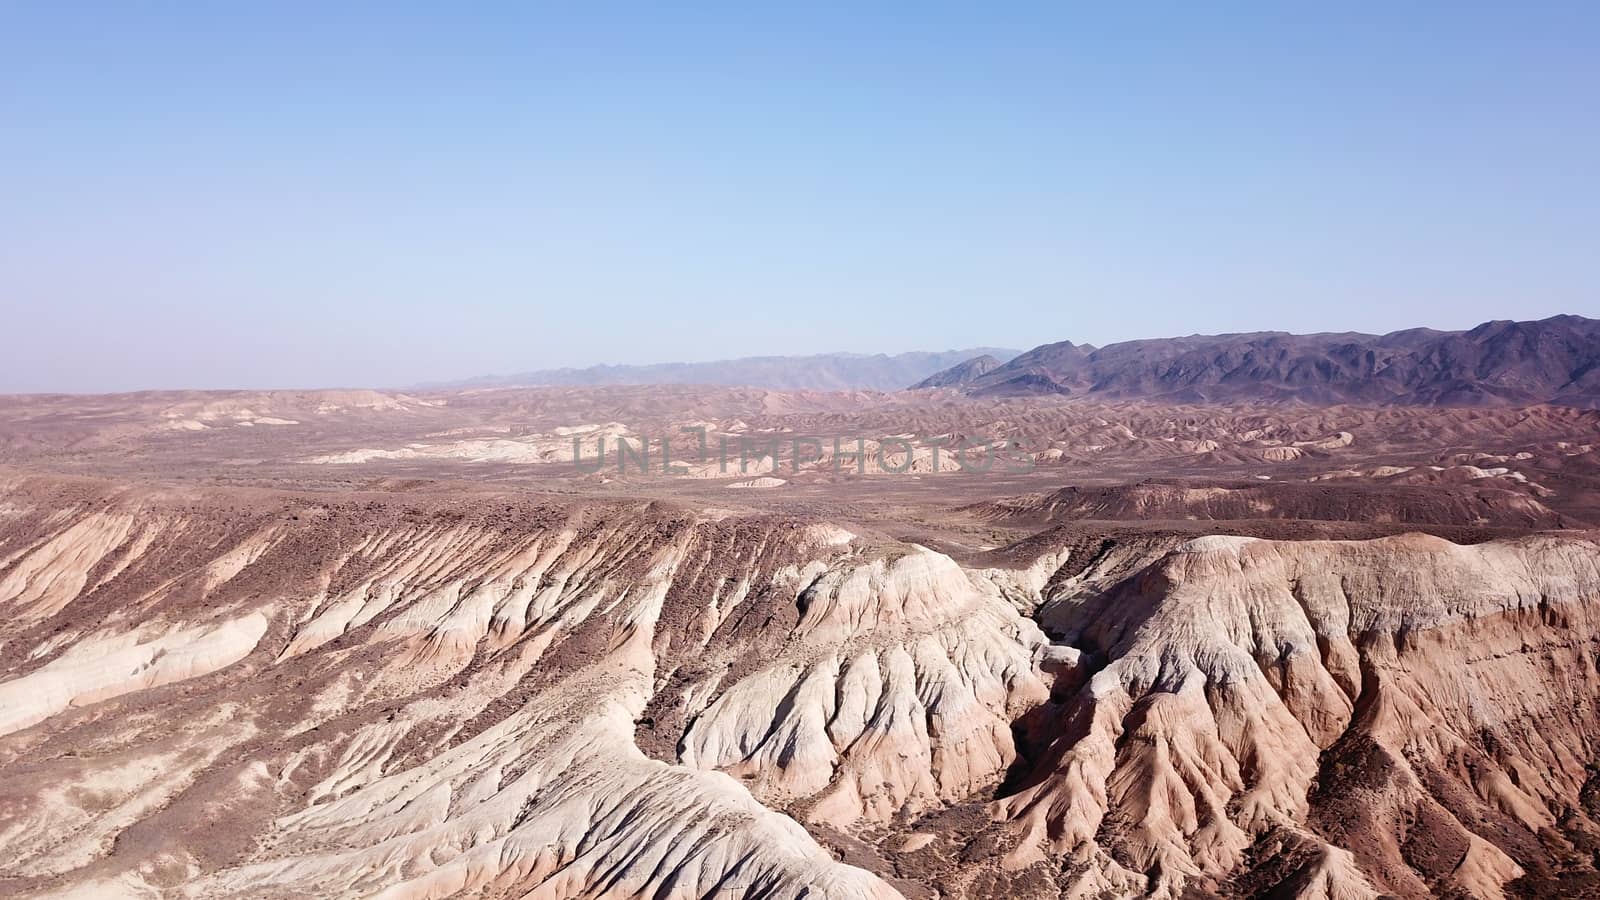 Colored hills of the gorge in the desert. by Passcal